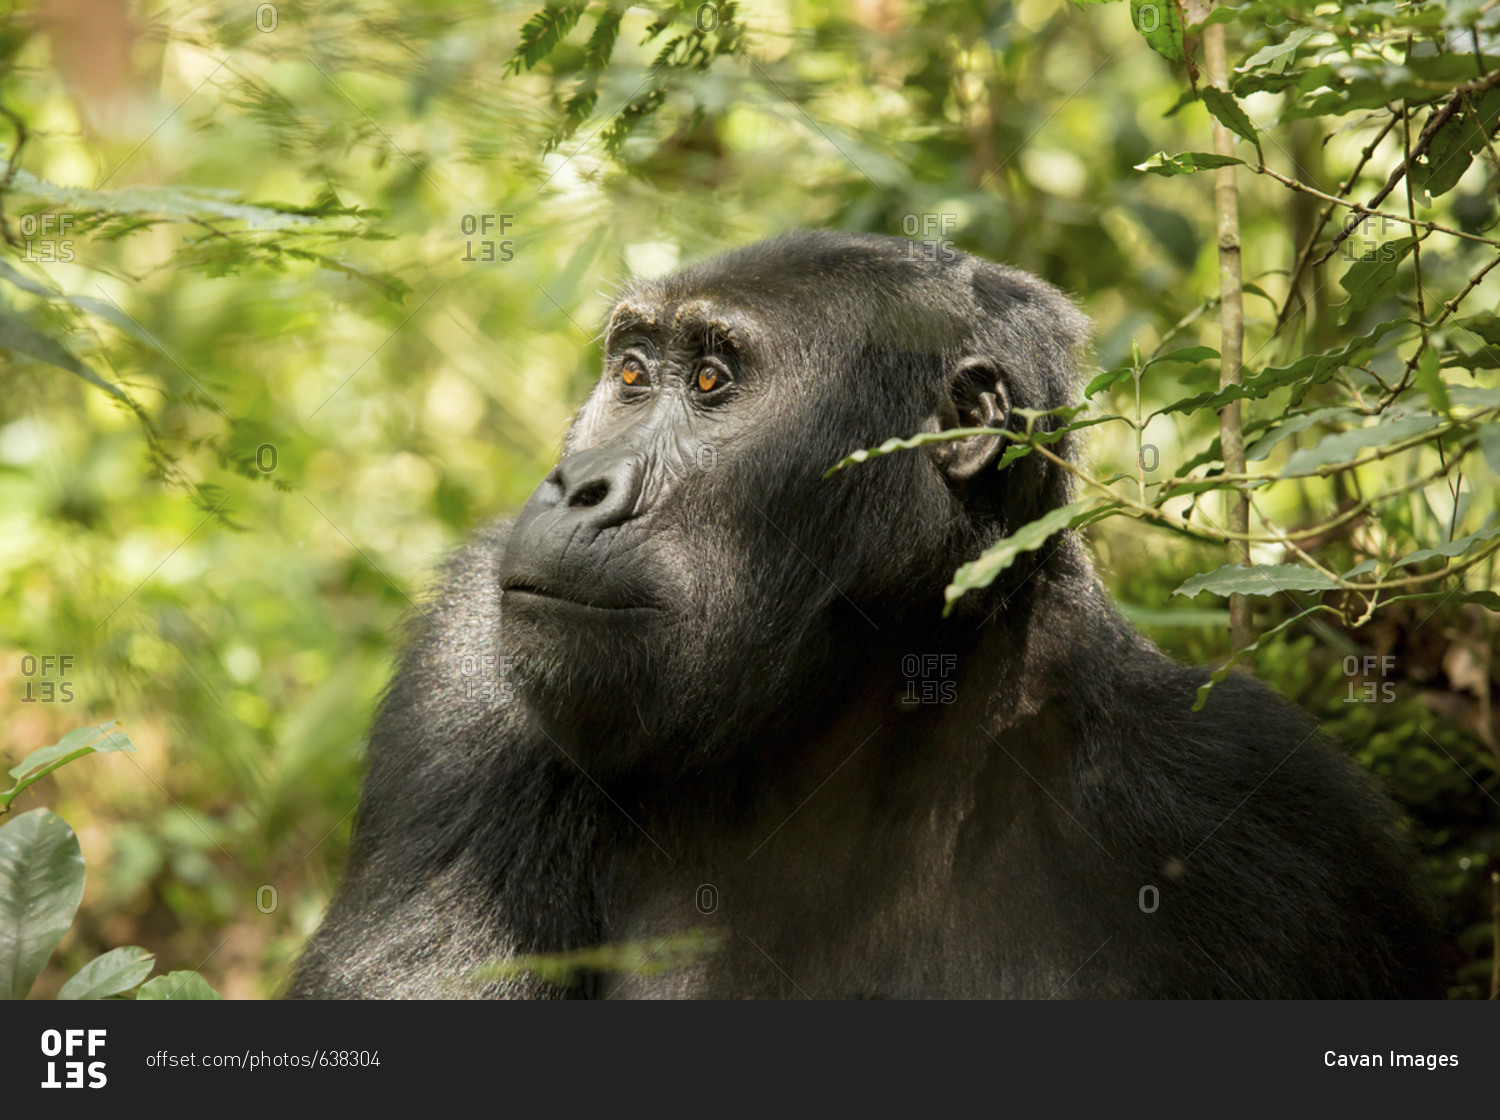 Chimpanzee looking away while sitting amidst plants in forest